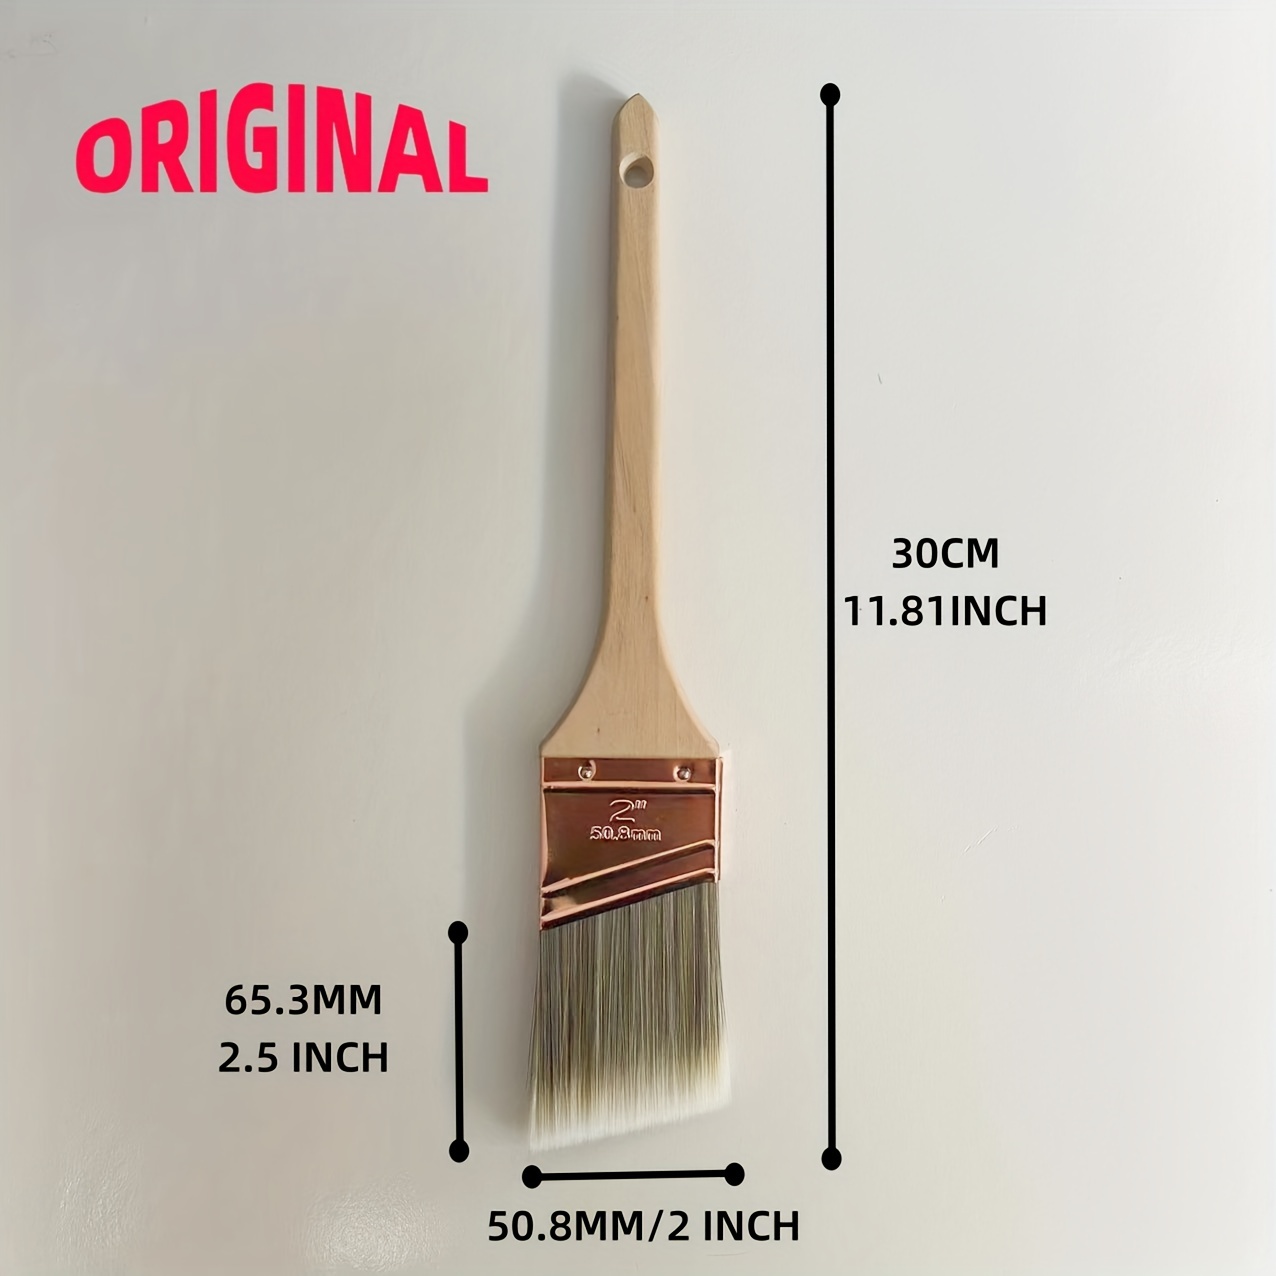 Angled Paint Brush: A Versatile Tool for Precise Painting